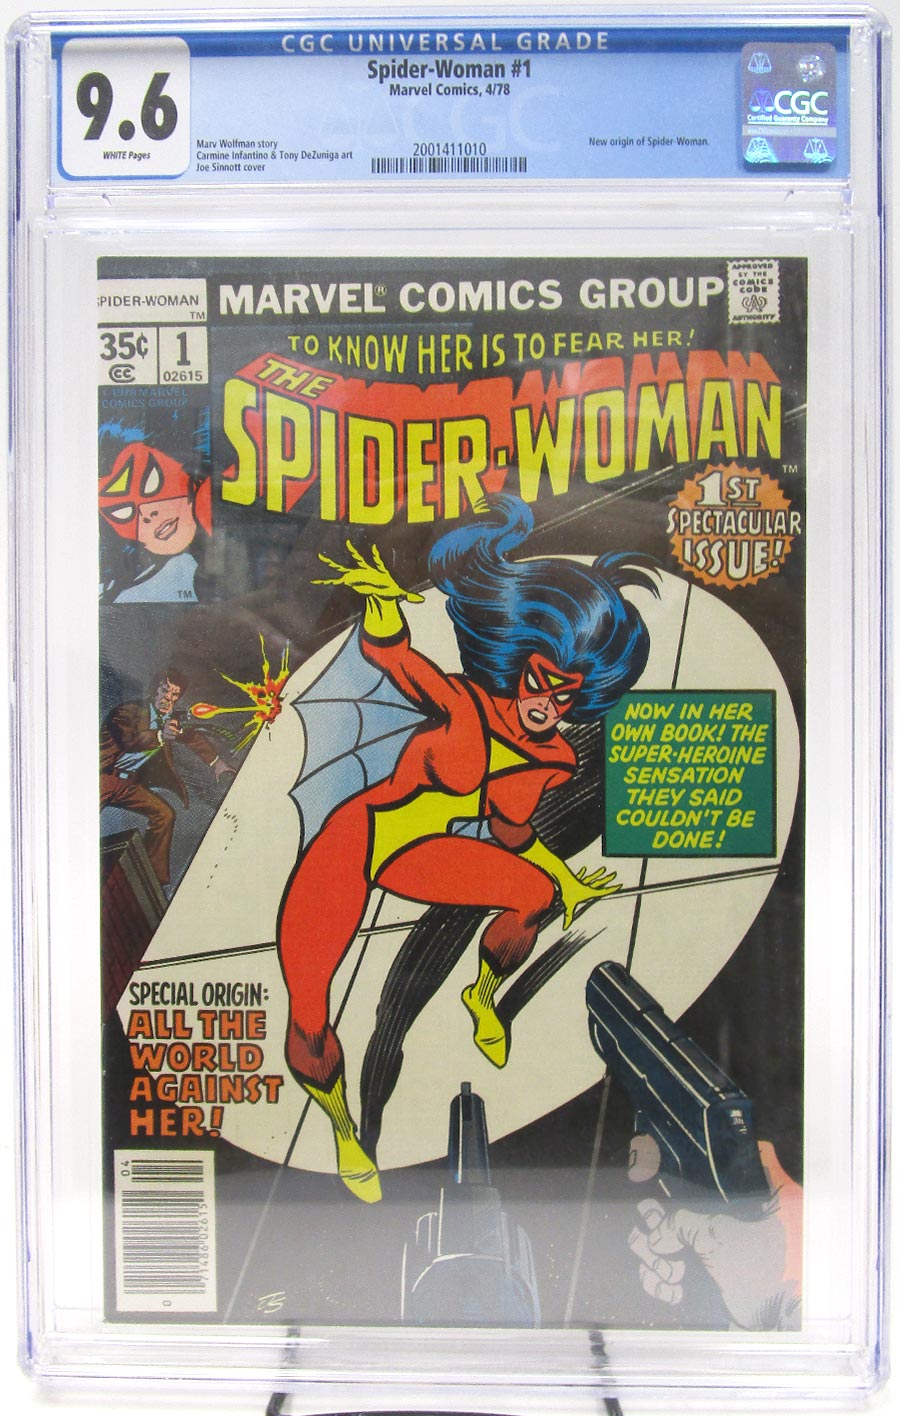 Spider-Woman #1 Cover D CGC 9.6 1st Ptg